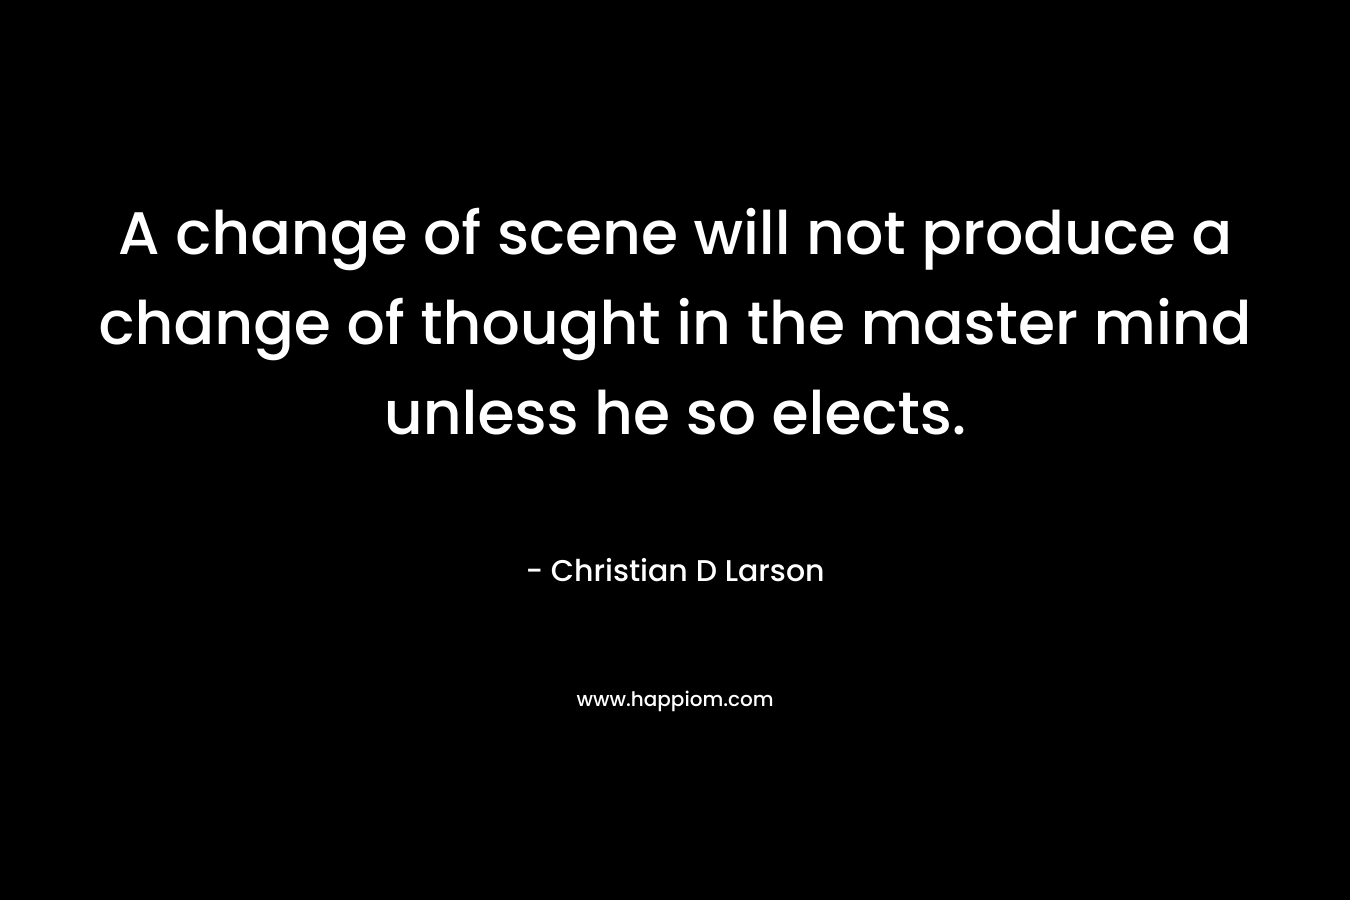 A change of scene will not produce a change of thought in the master mind unless he so elects. – Christian D Larson